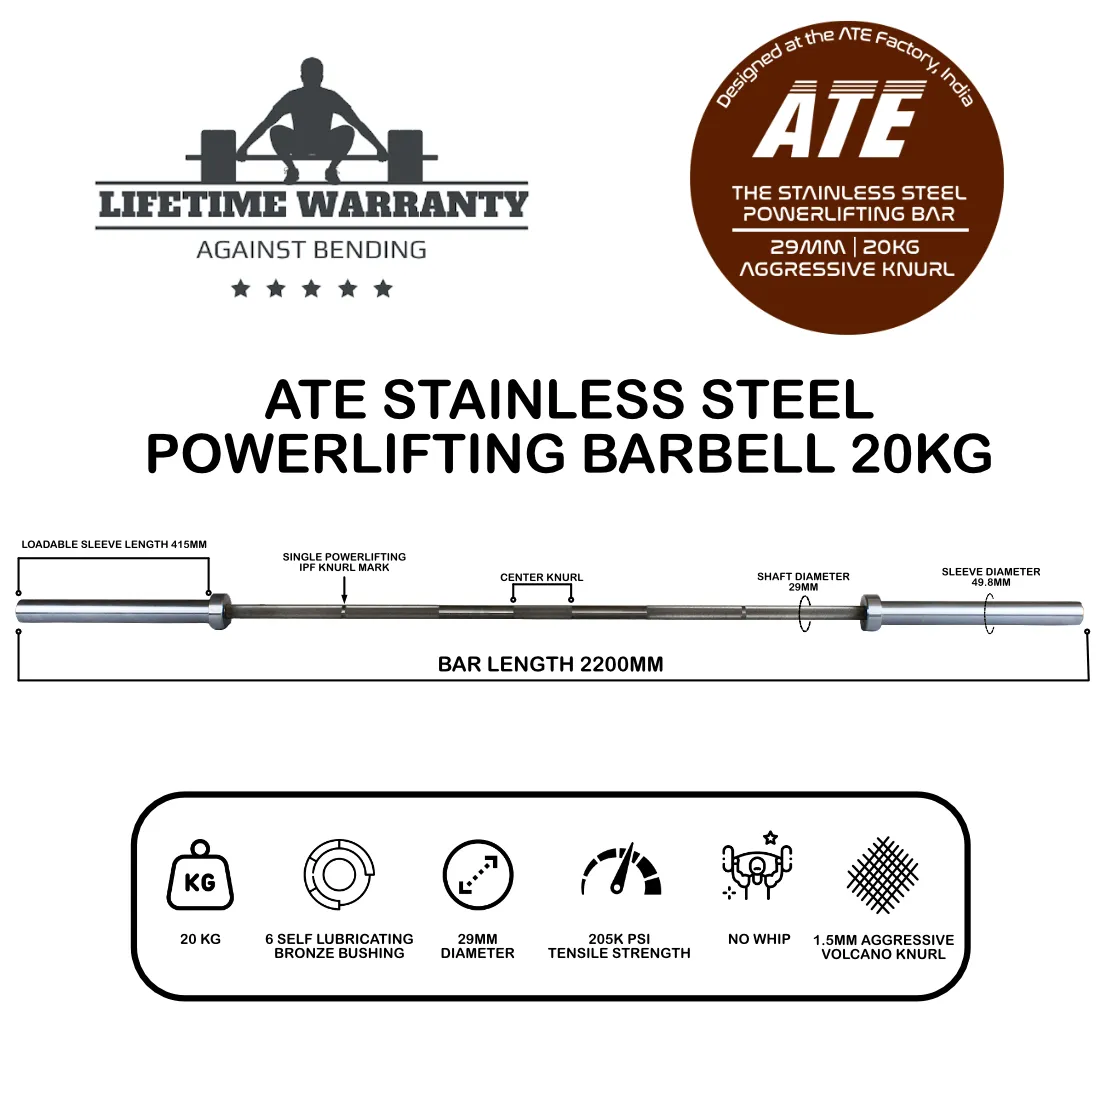 ATE stainless steel barbell